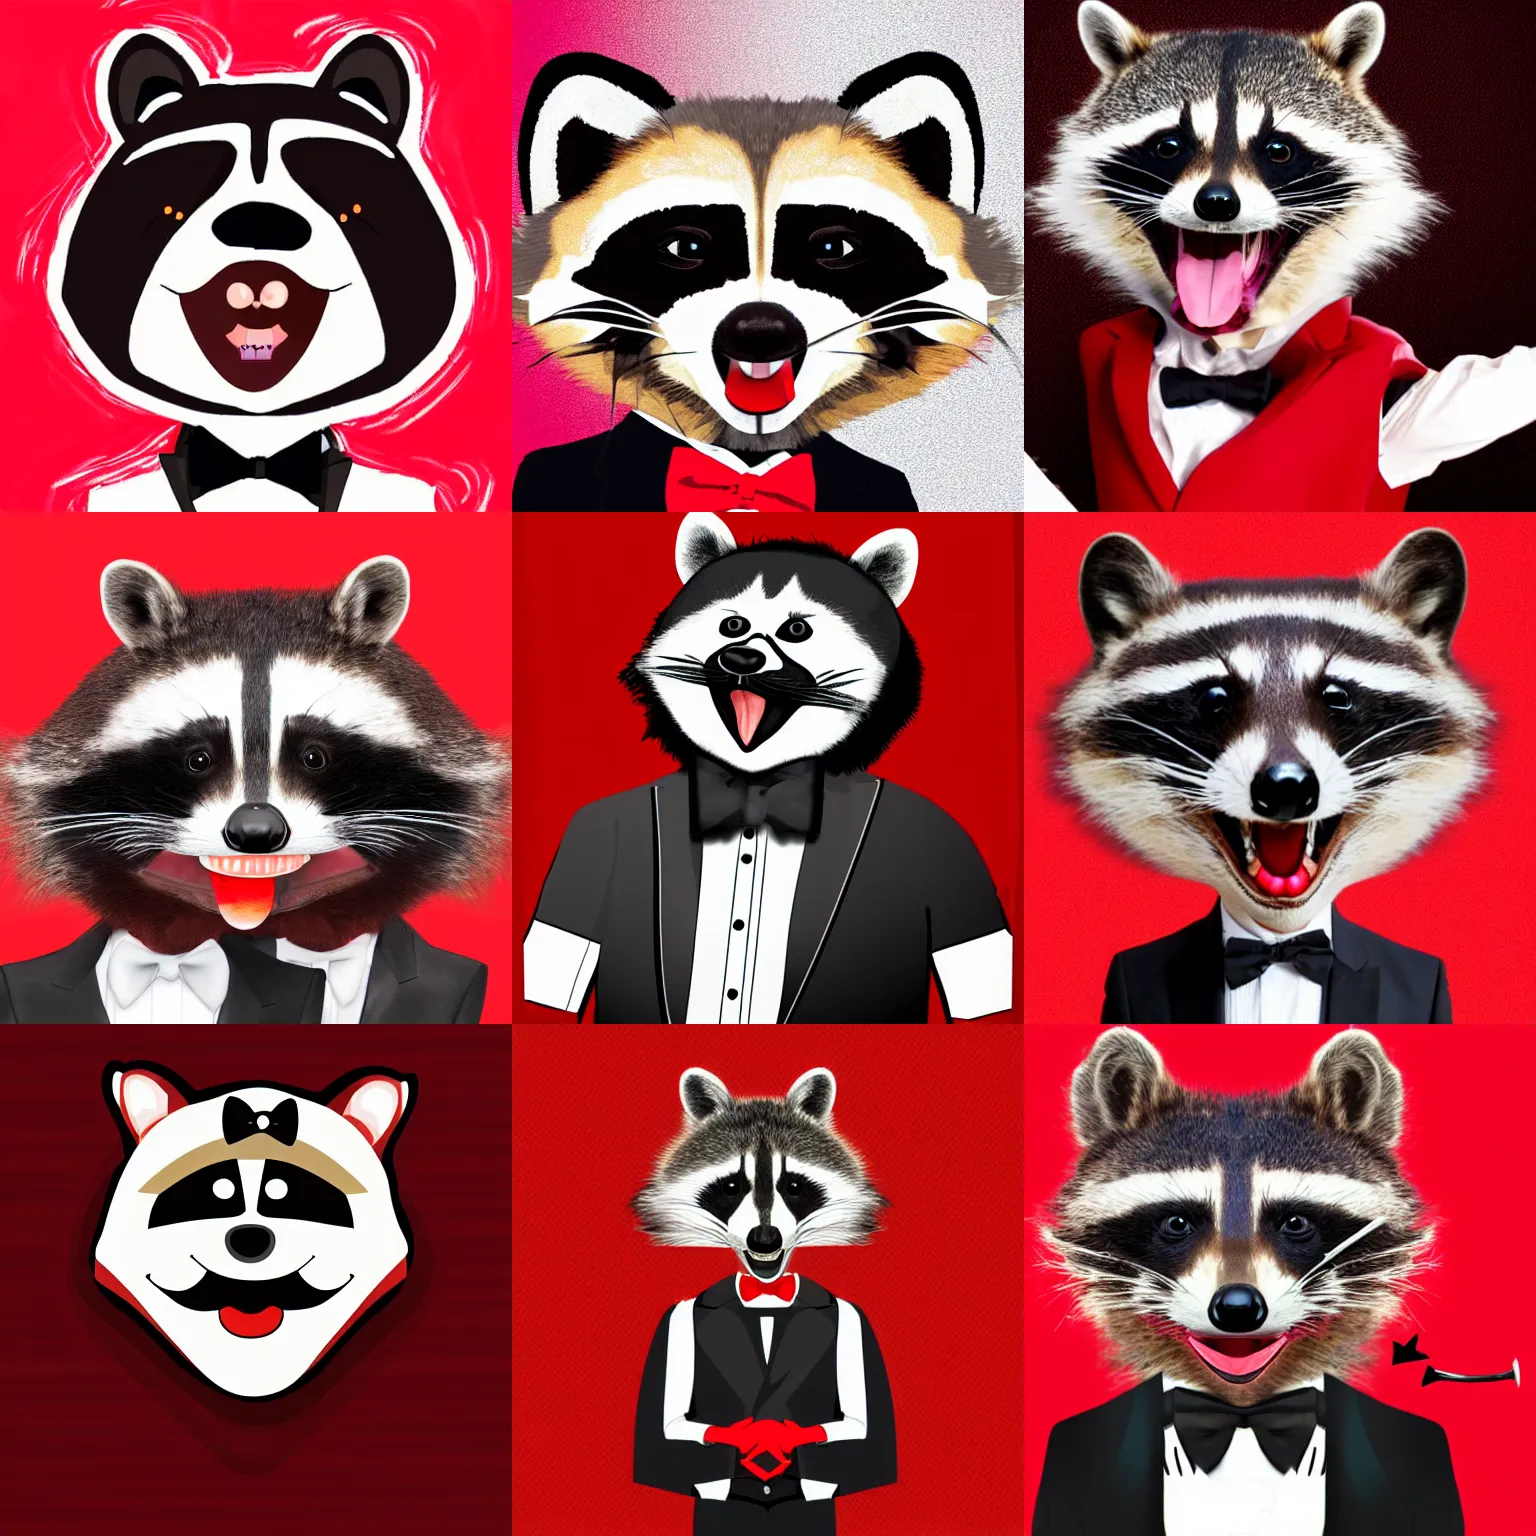 Prompt: A person with a raccoon head with their tongue sticking out, wearing a tuxedo, digital art, red background